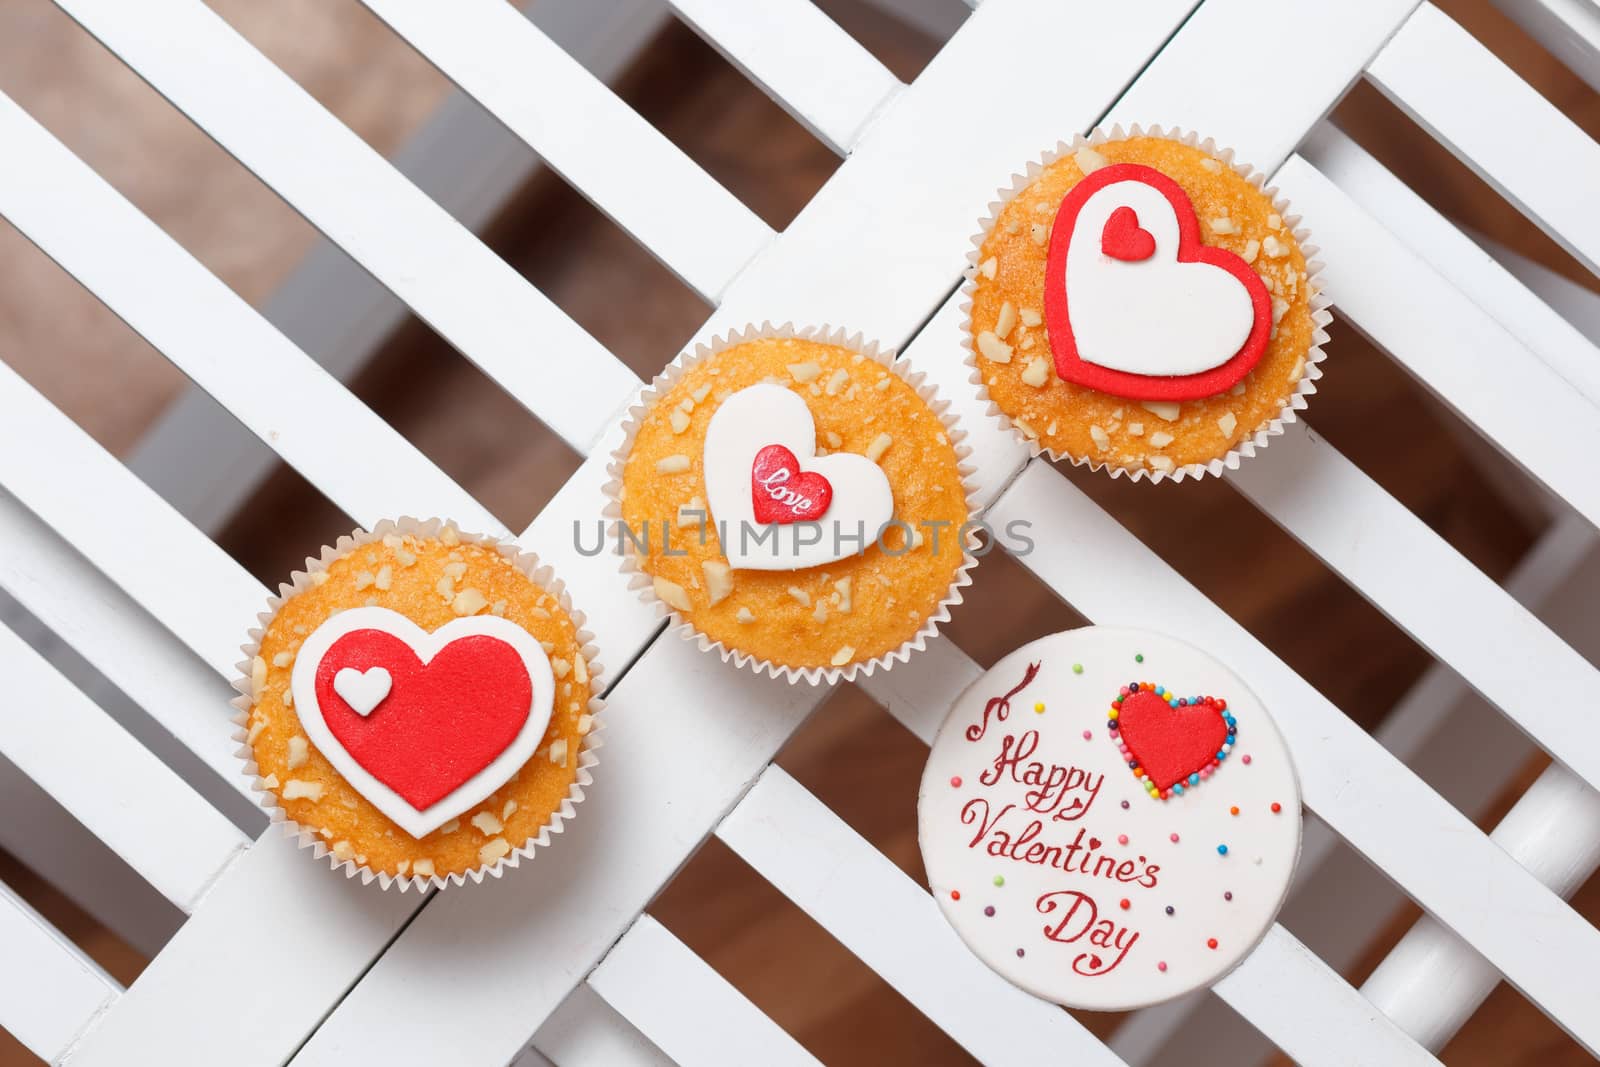 valentine's day muffins with red and white hearts on a white wooden table with a note